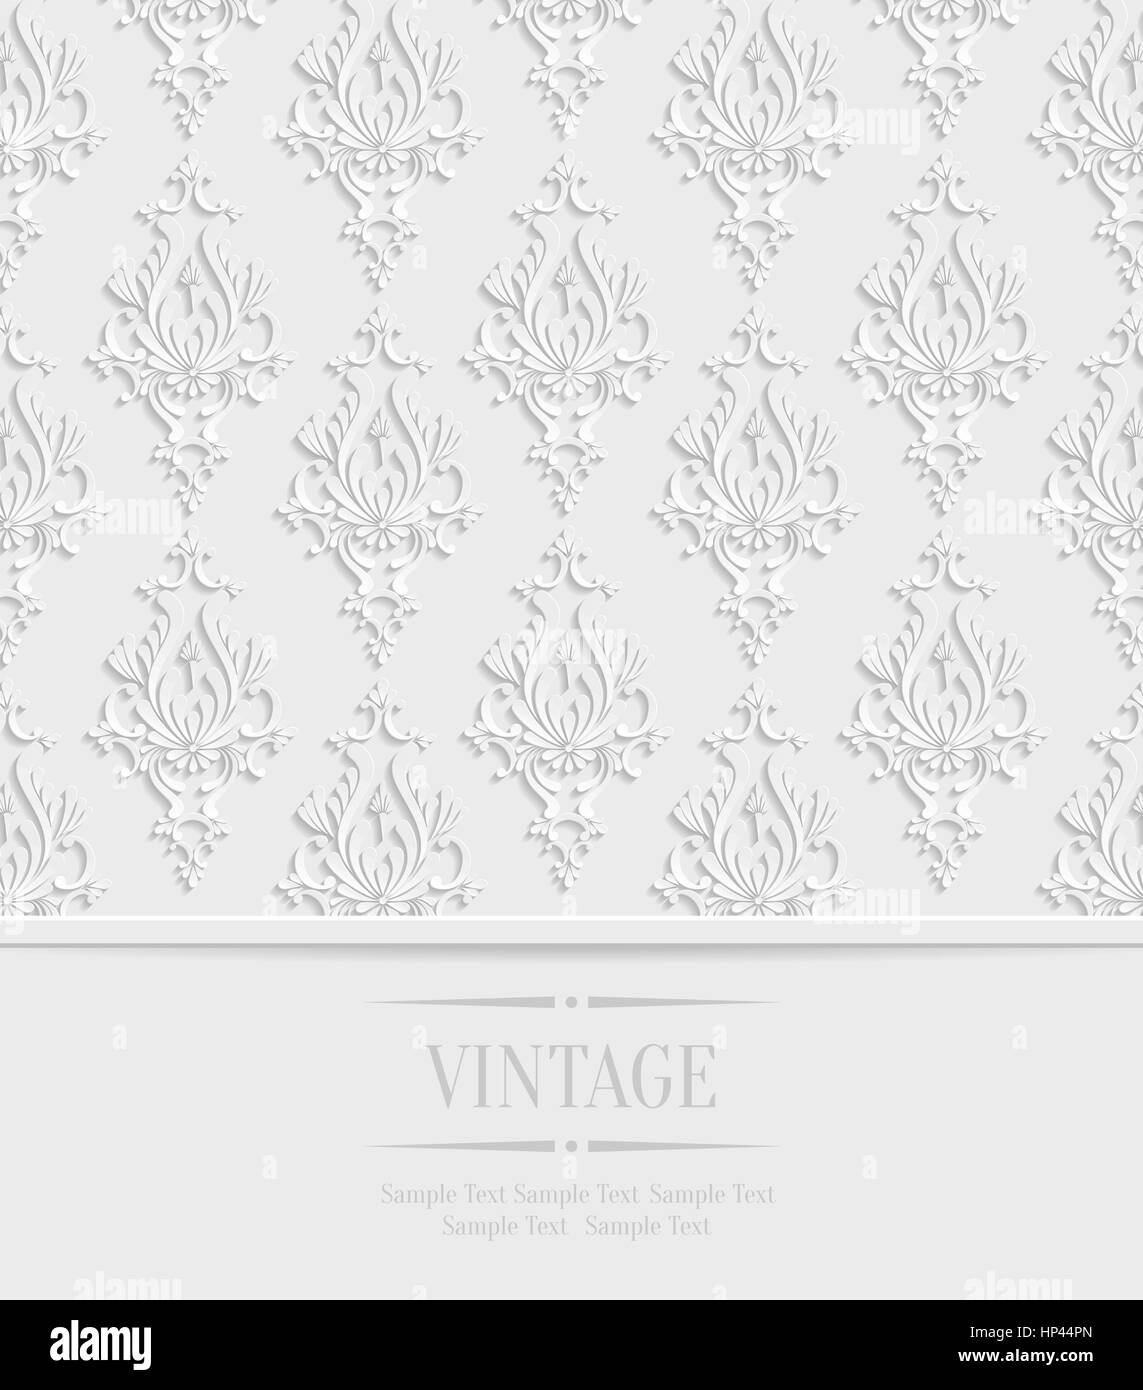 Vector White Vintage Wedding or Invitation Background with 3d Floral Damask Pattern Stock Vector